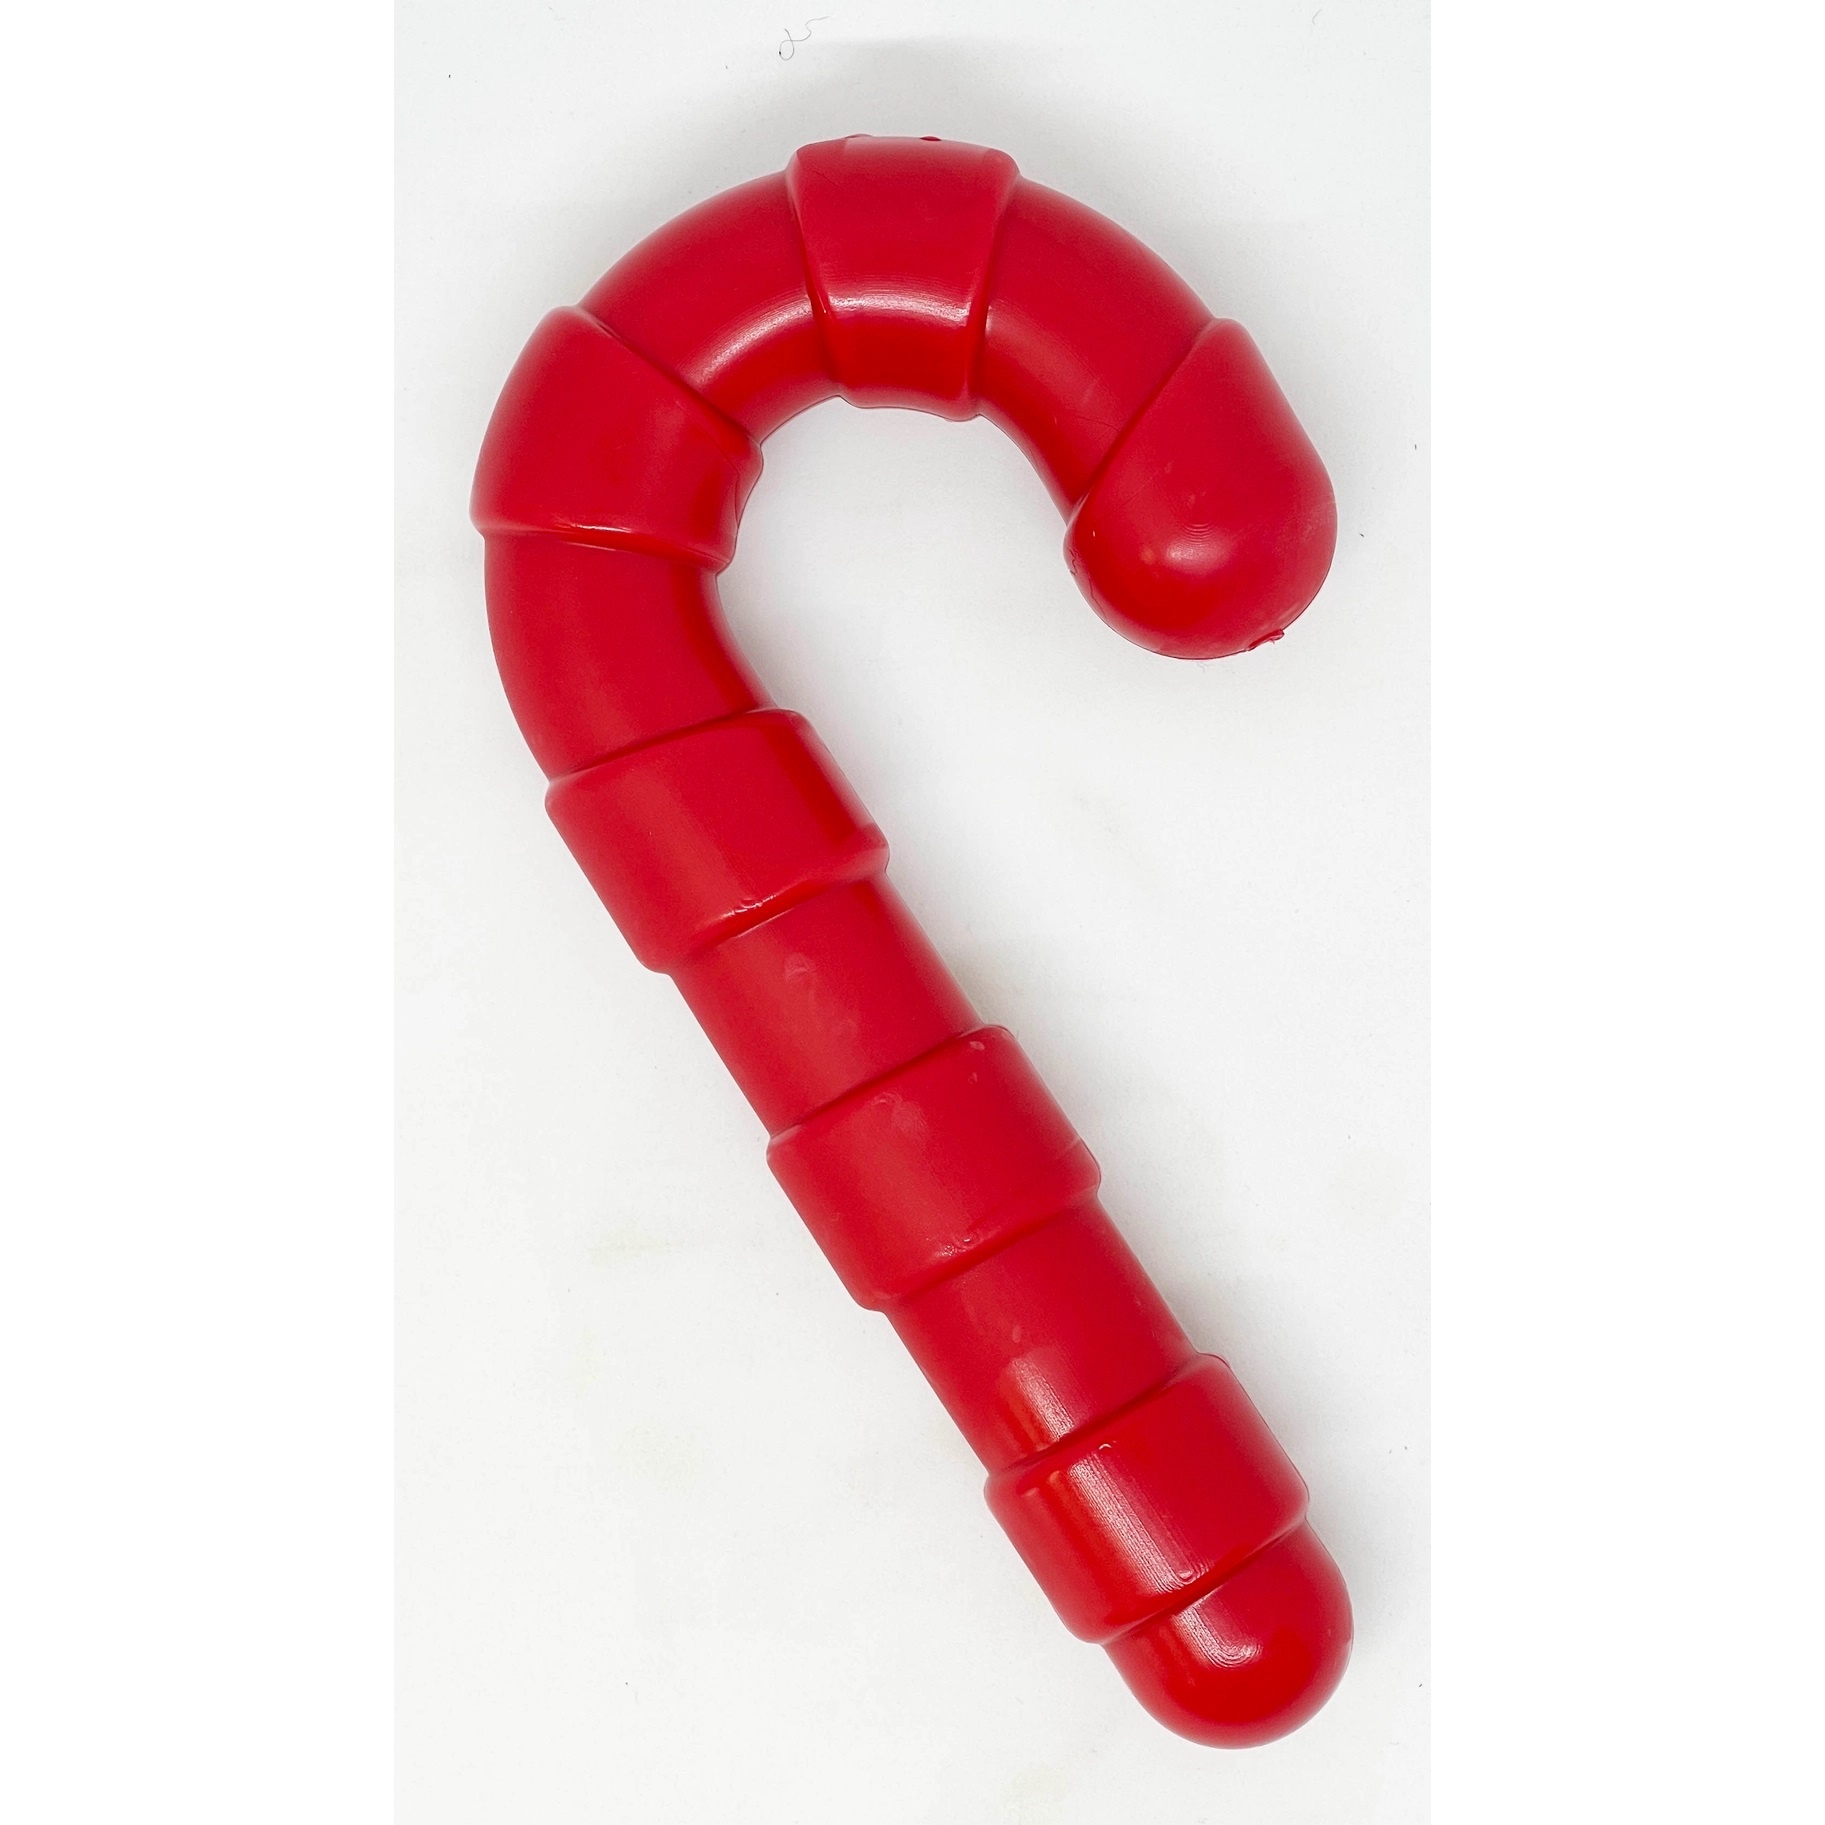 Sodapup Sodapup Candy Cane Durable Nylon Chew Toy